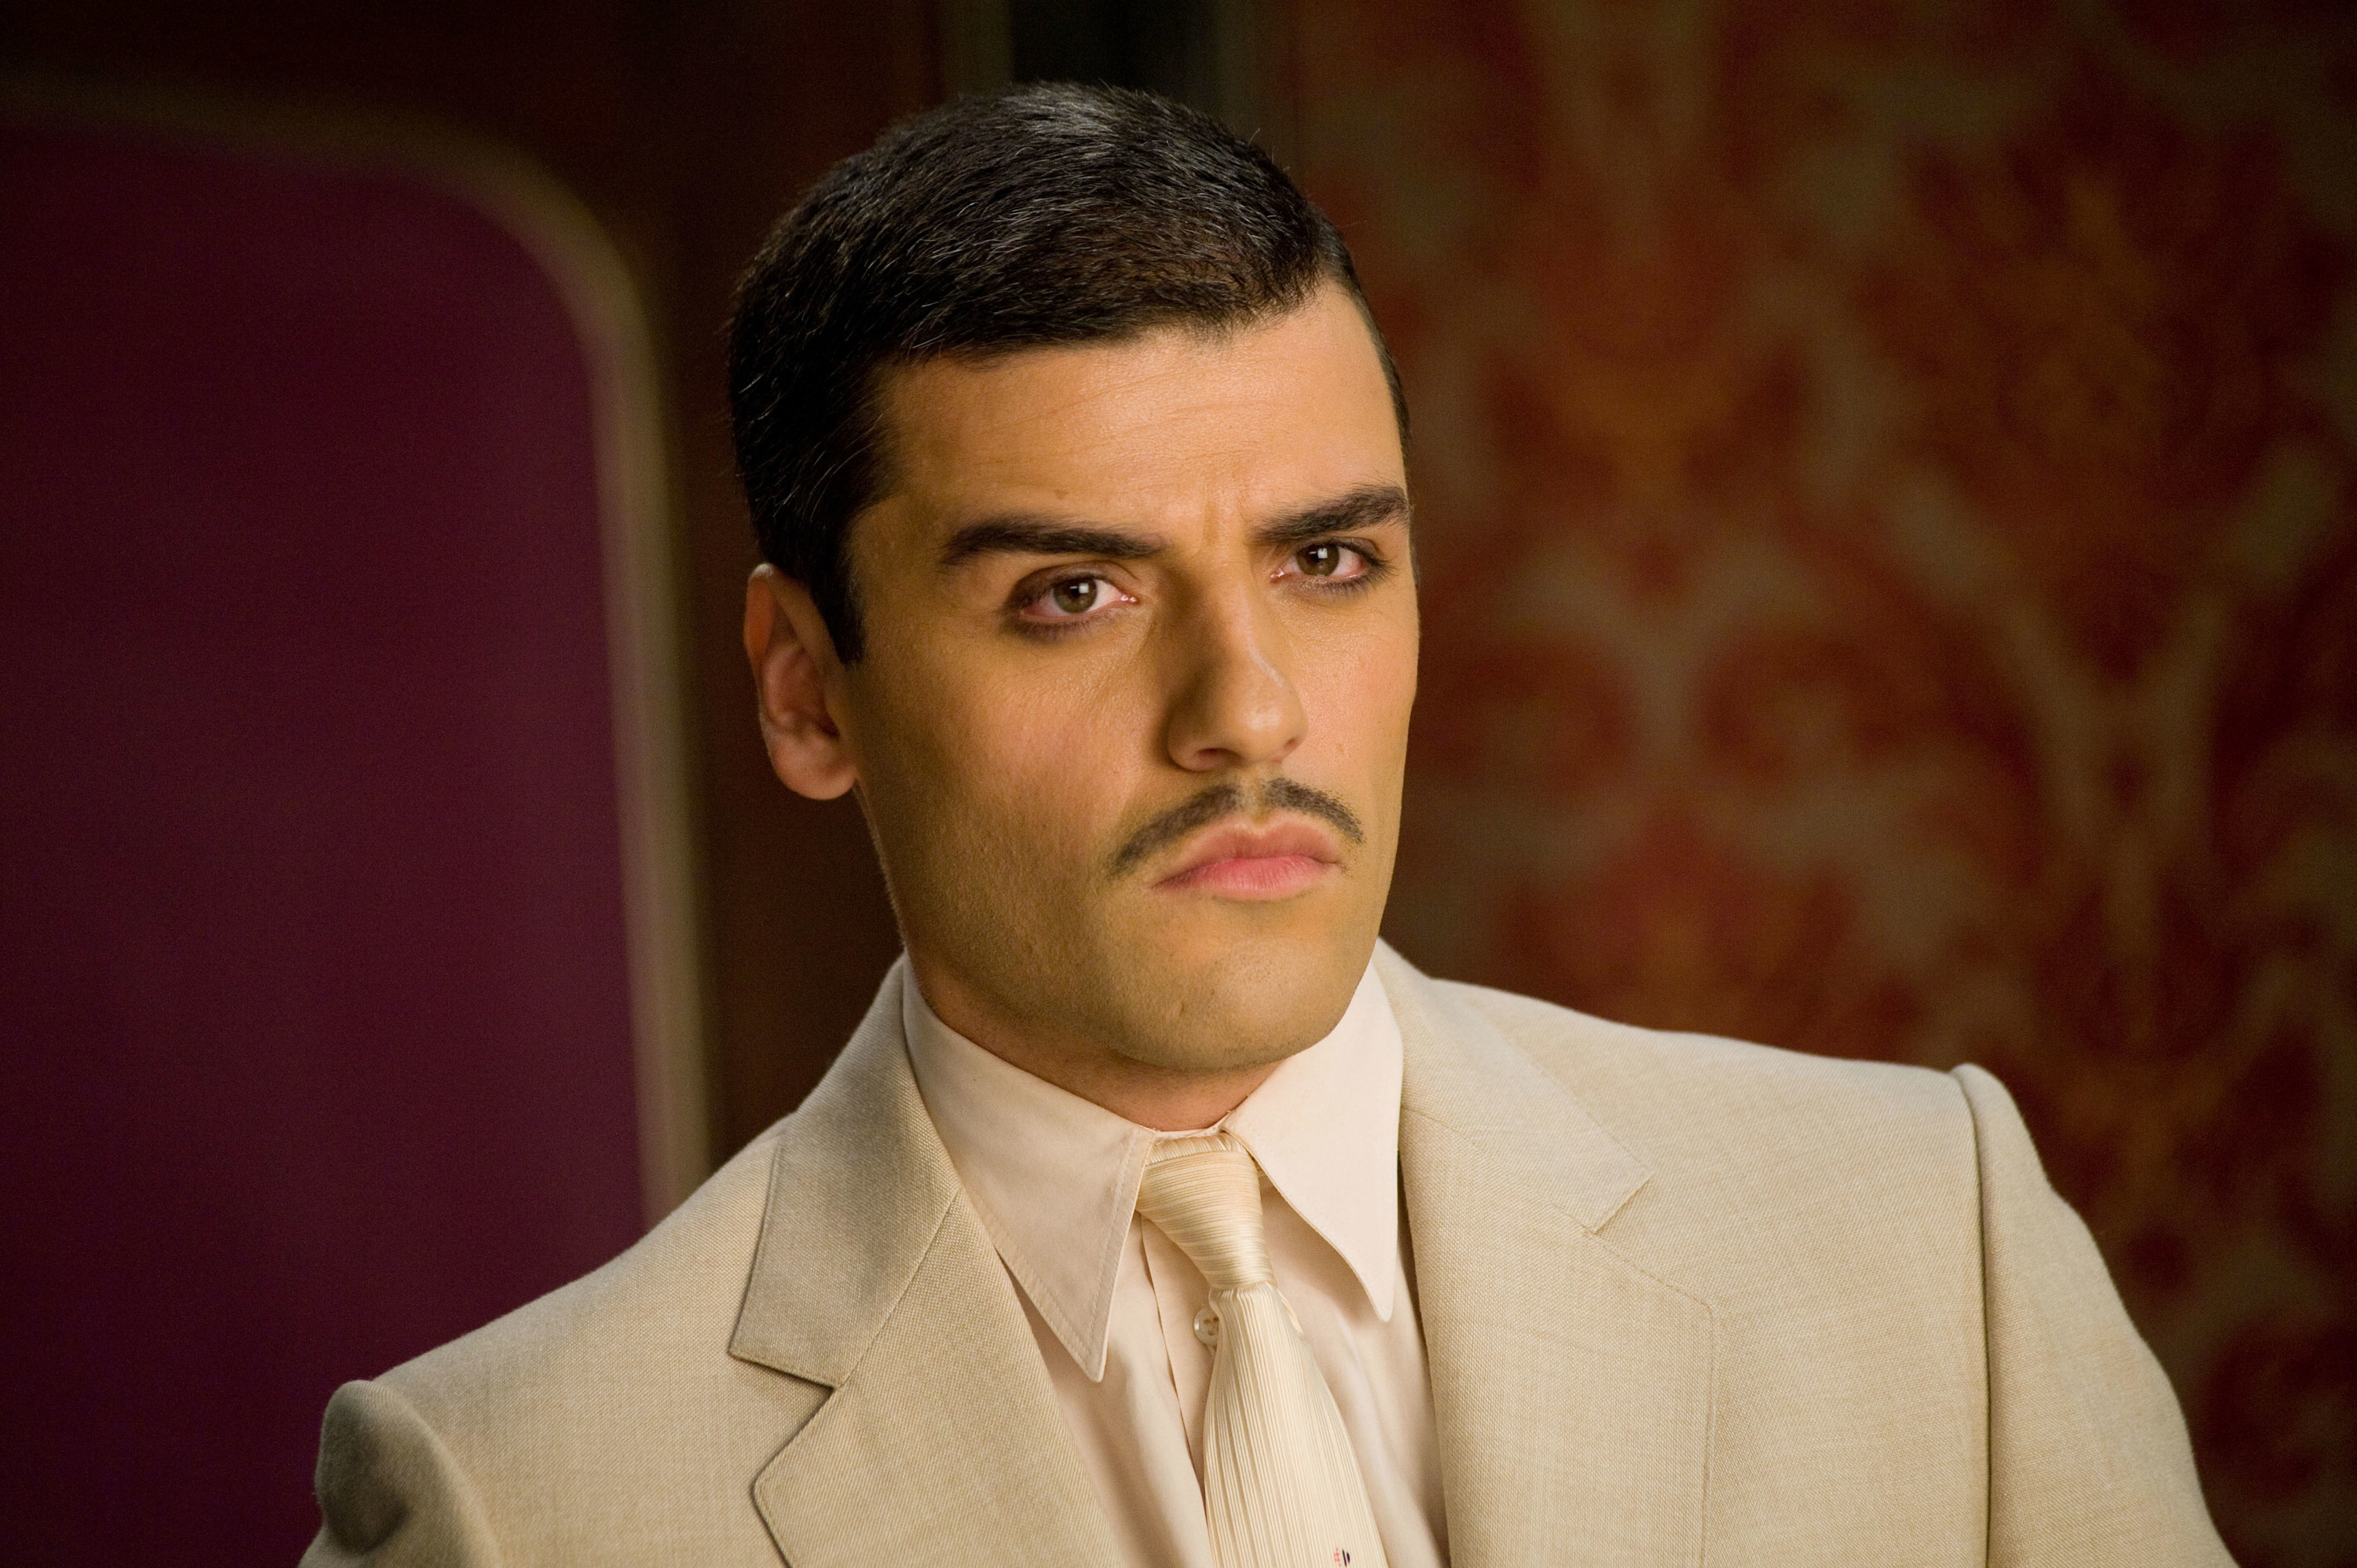 Oscar Isaac (and his mustache) look off camera